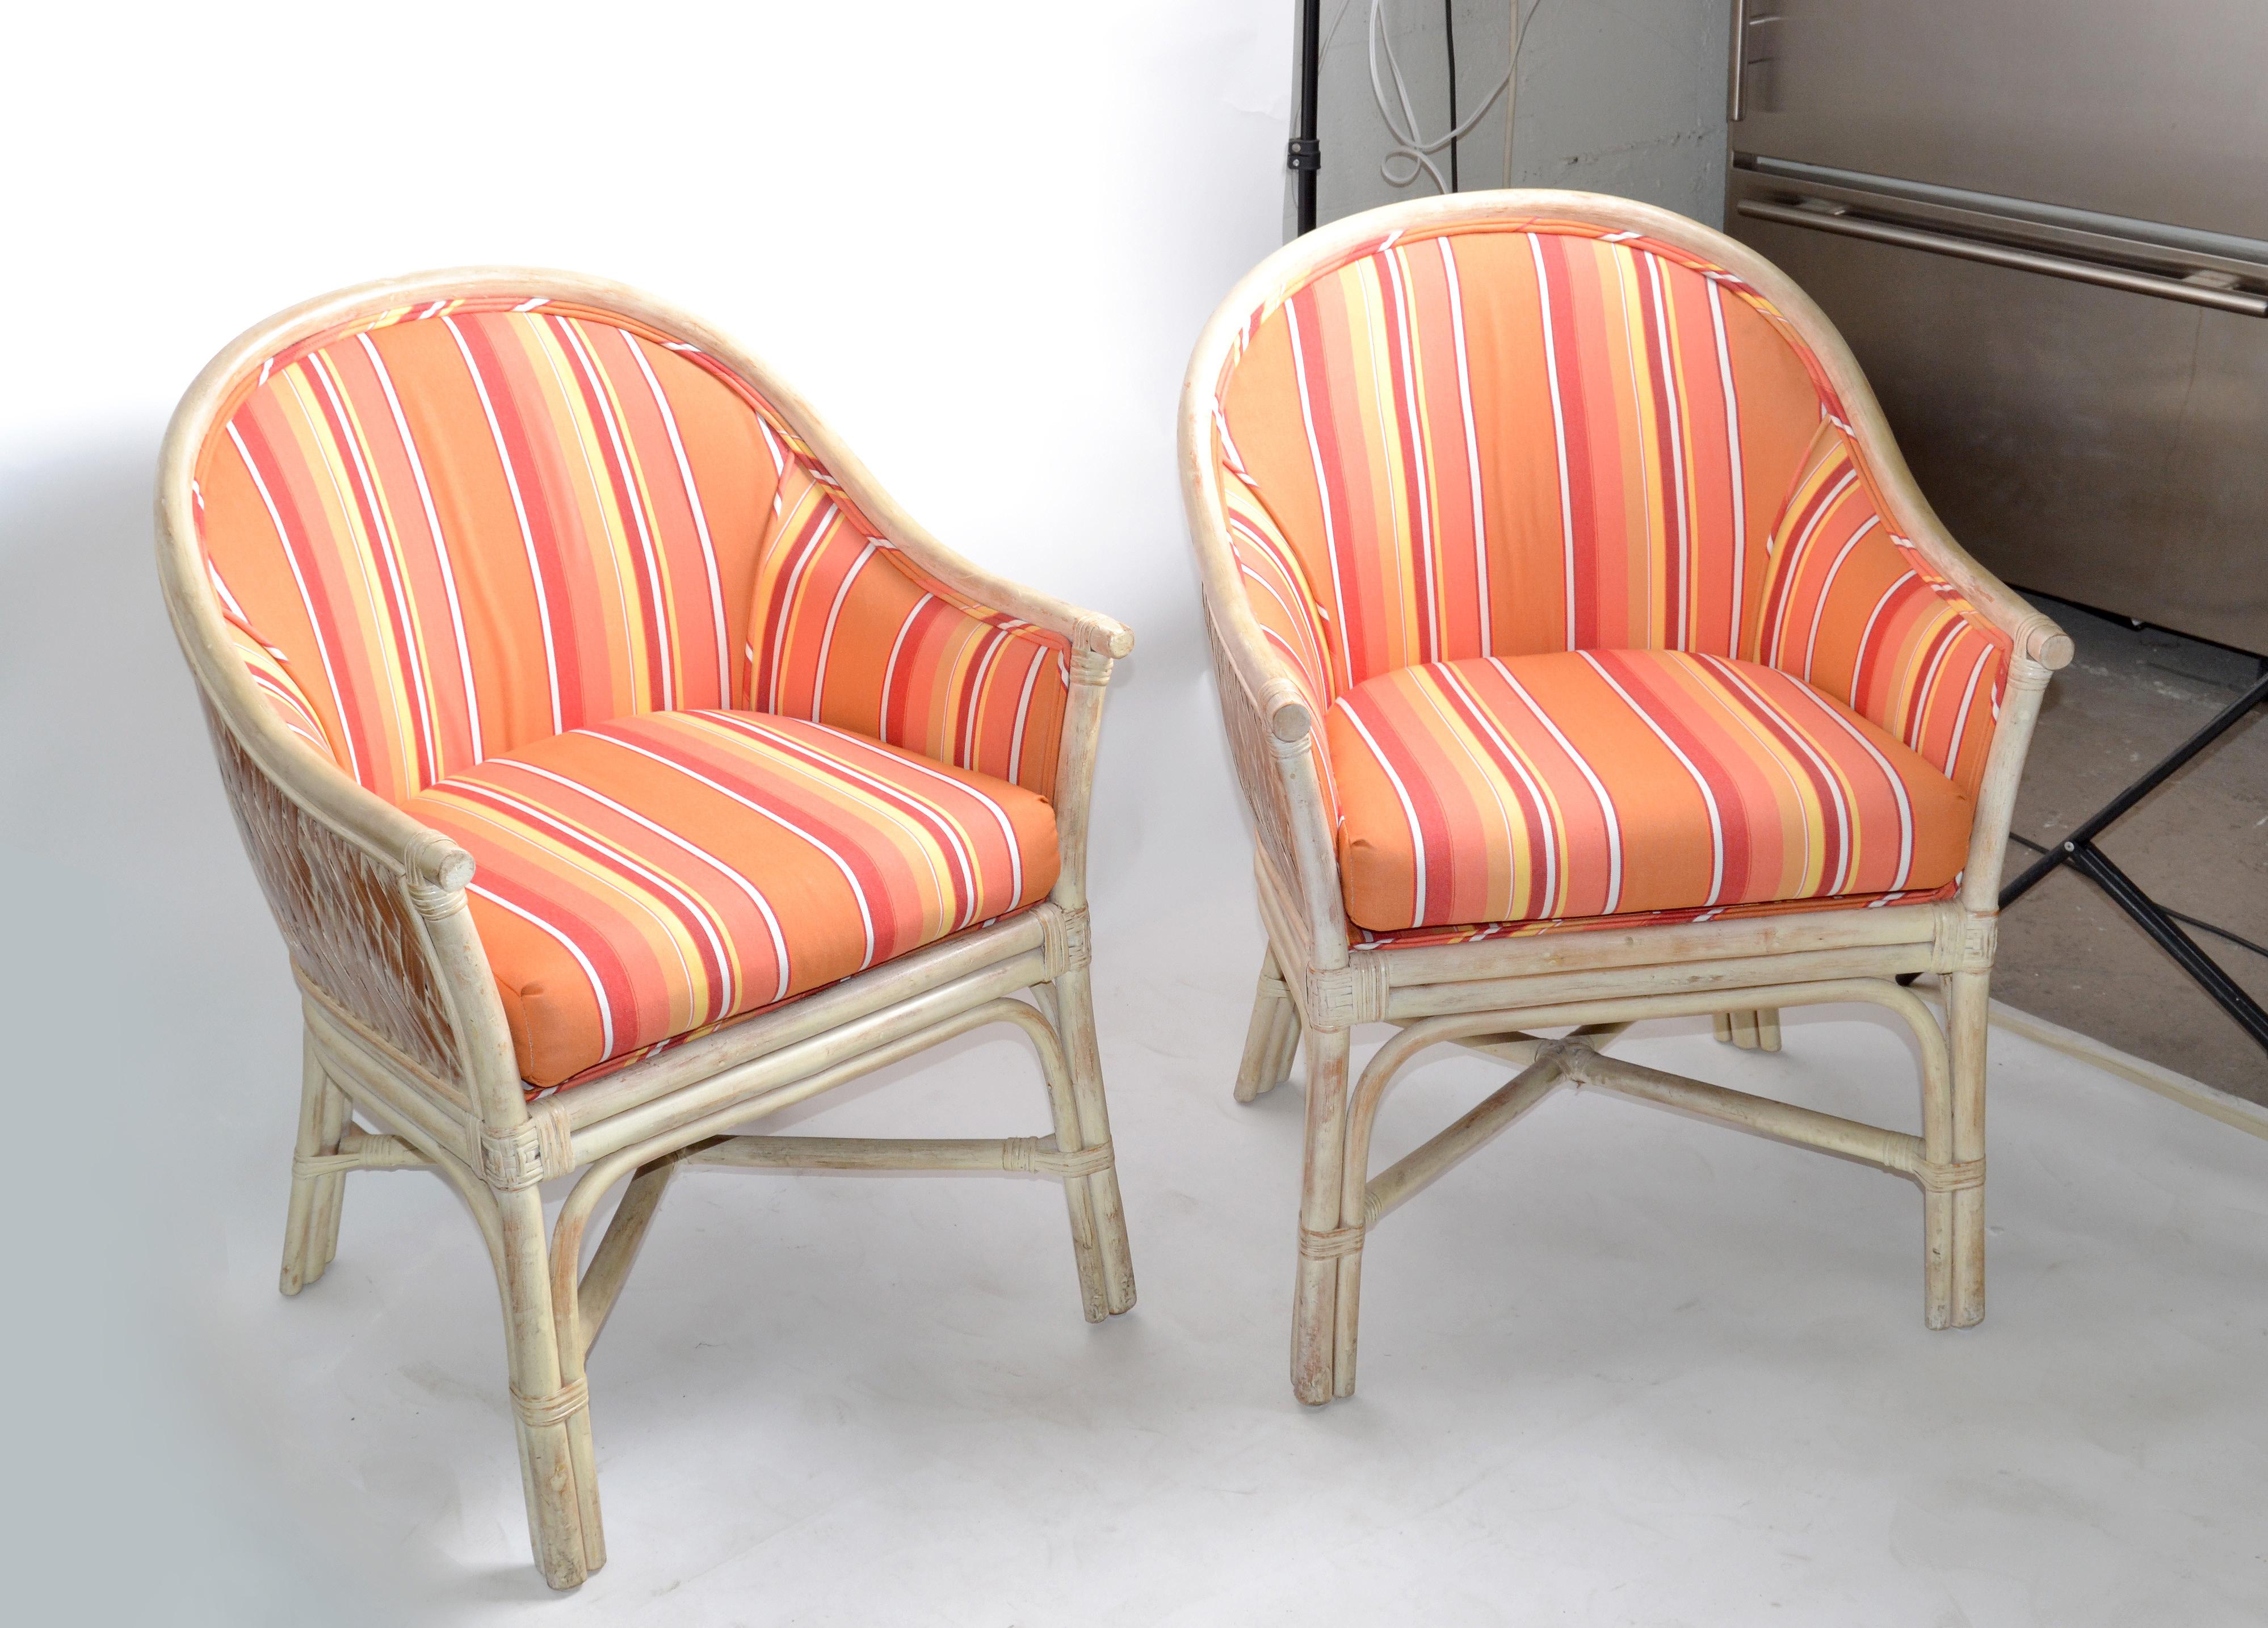 Pair, Mid-Century Modern Bamboo & Cane Armchair Orange Striped Upholstery, 1970 For Sale 4